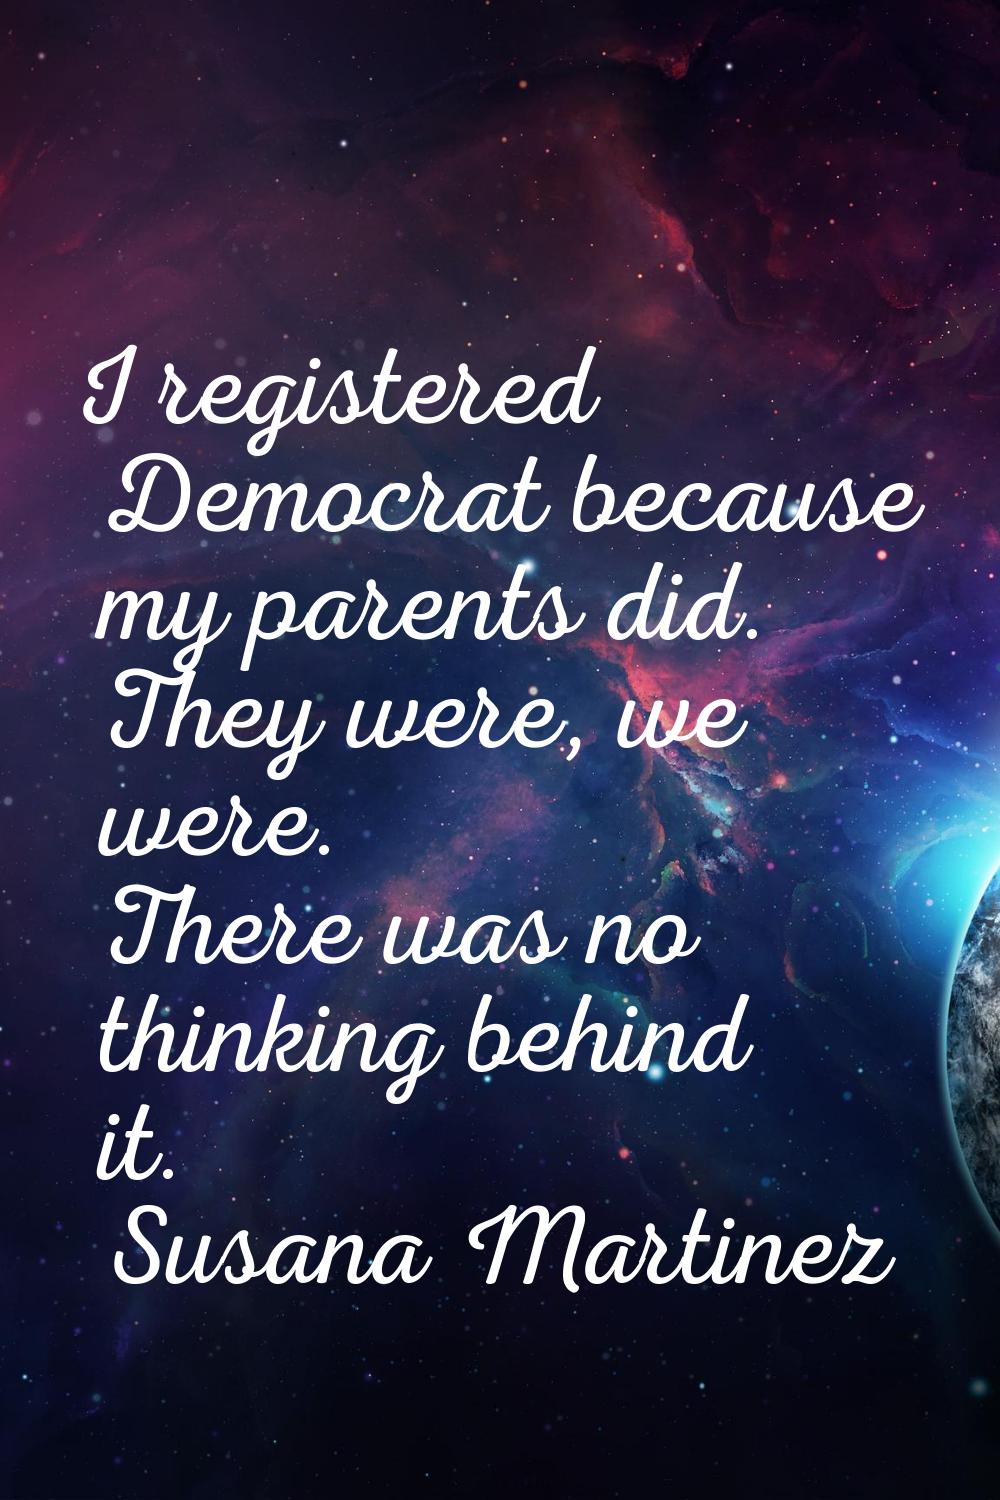 I registered Democrat because my parents did. They were, we were. There was no thinking behind it.